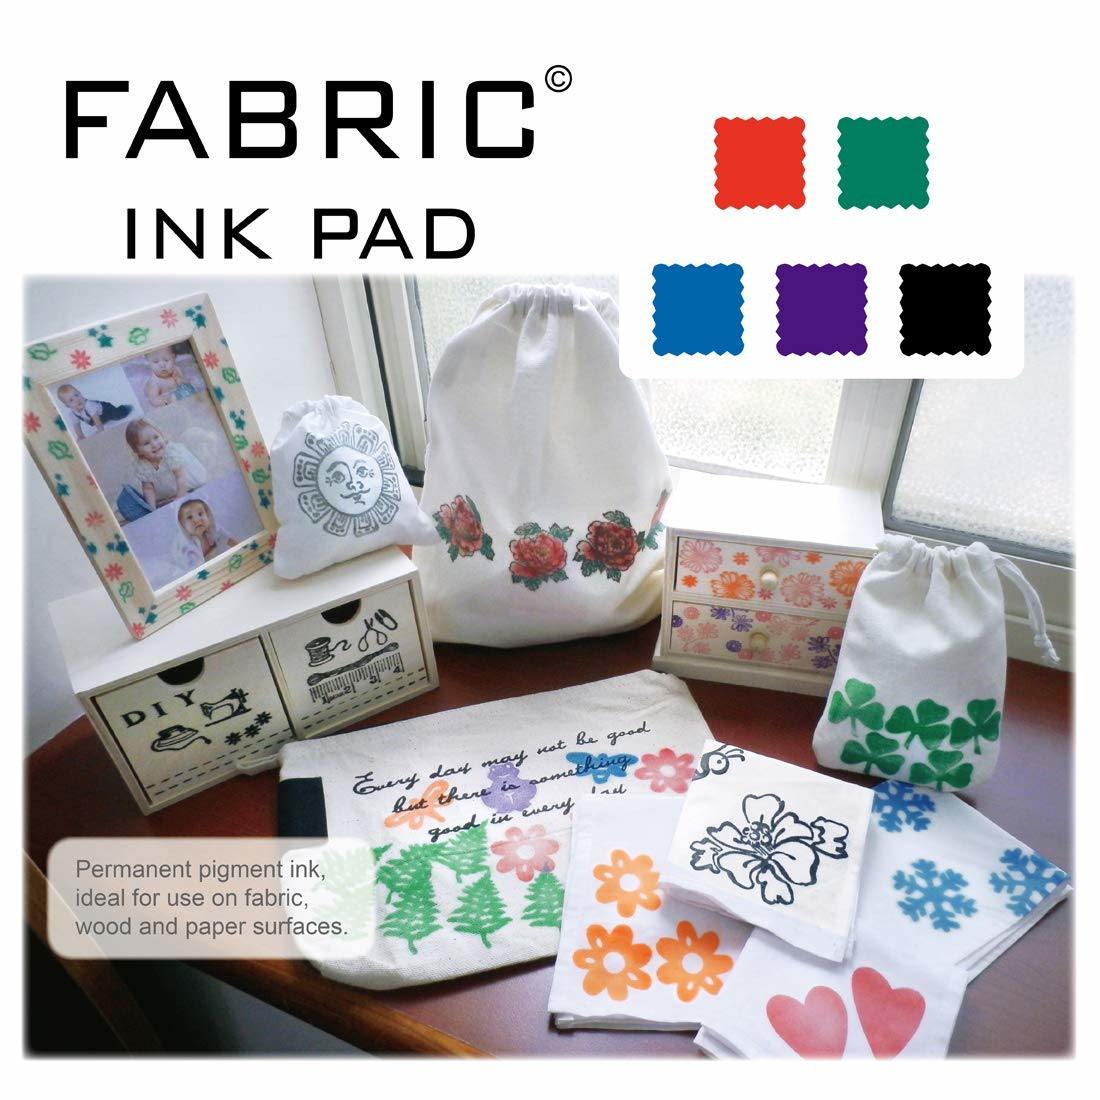 Stamp Pad;  Fabric Ink Pad Stamps Set;  5 Colors Non-Toxic Pigment Ink Pad for Stamps;  Rubber Stamps;  Card Making Supplies;  Wood;  Fabric and Paper Surface. Stamps for Crafts (5 Pack)